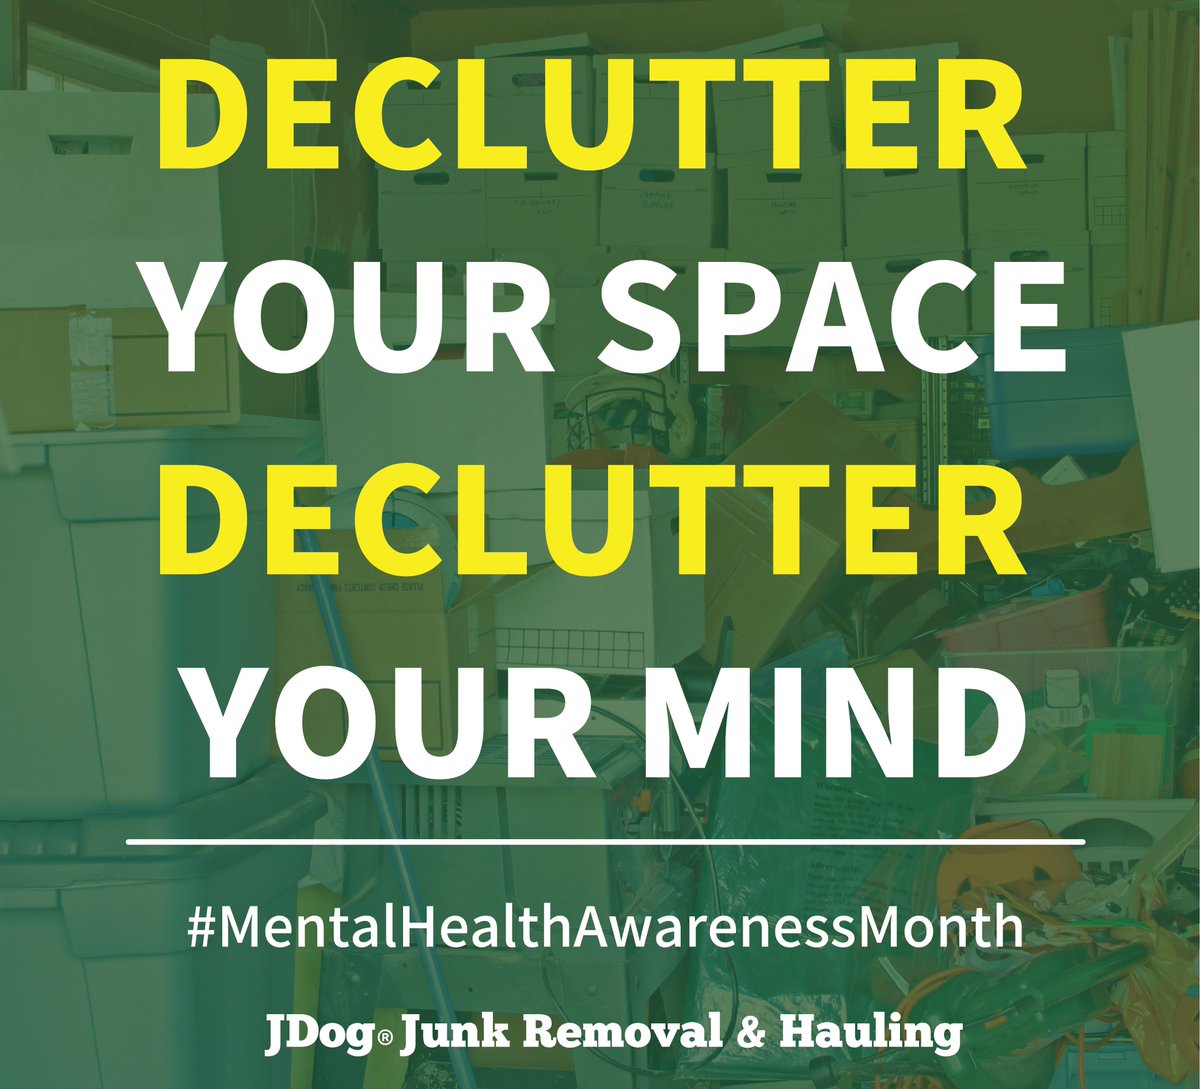 It's #mentalhealthawarenessmonth! Decluttering your living space, can improve your mental health and help you declutter your mind!

#mentalhealth #declutter #junkremoval #jdogjunkremoval #junkremovalservice #veteran #veteranowned #sandiego #sandiegocleaning